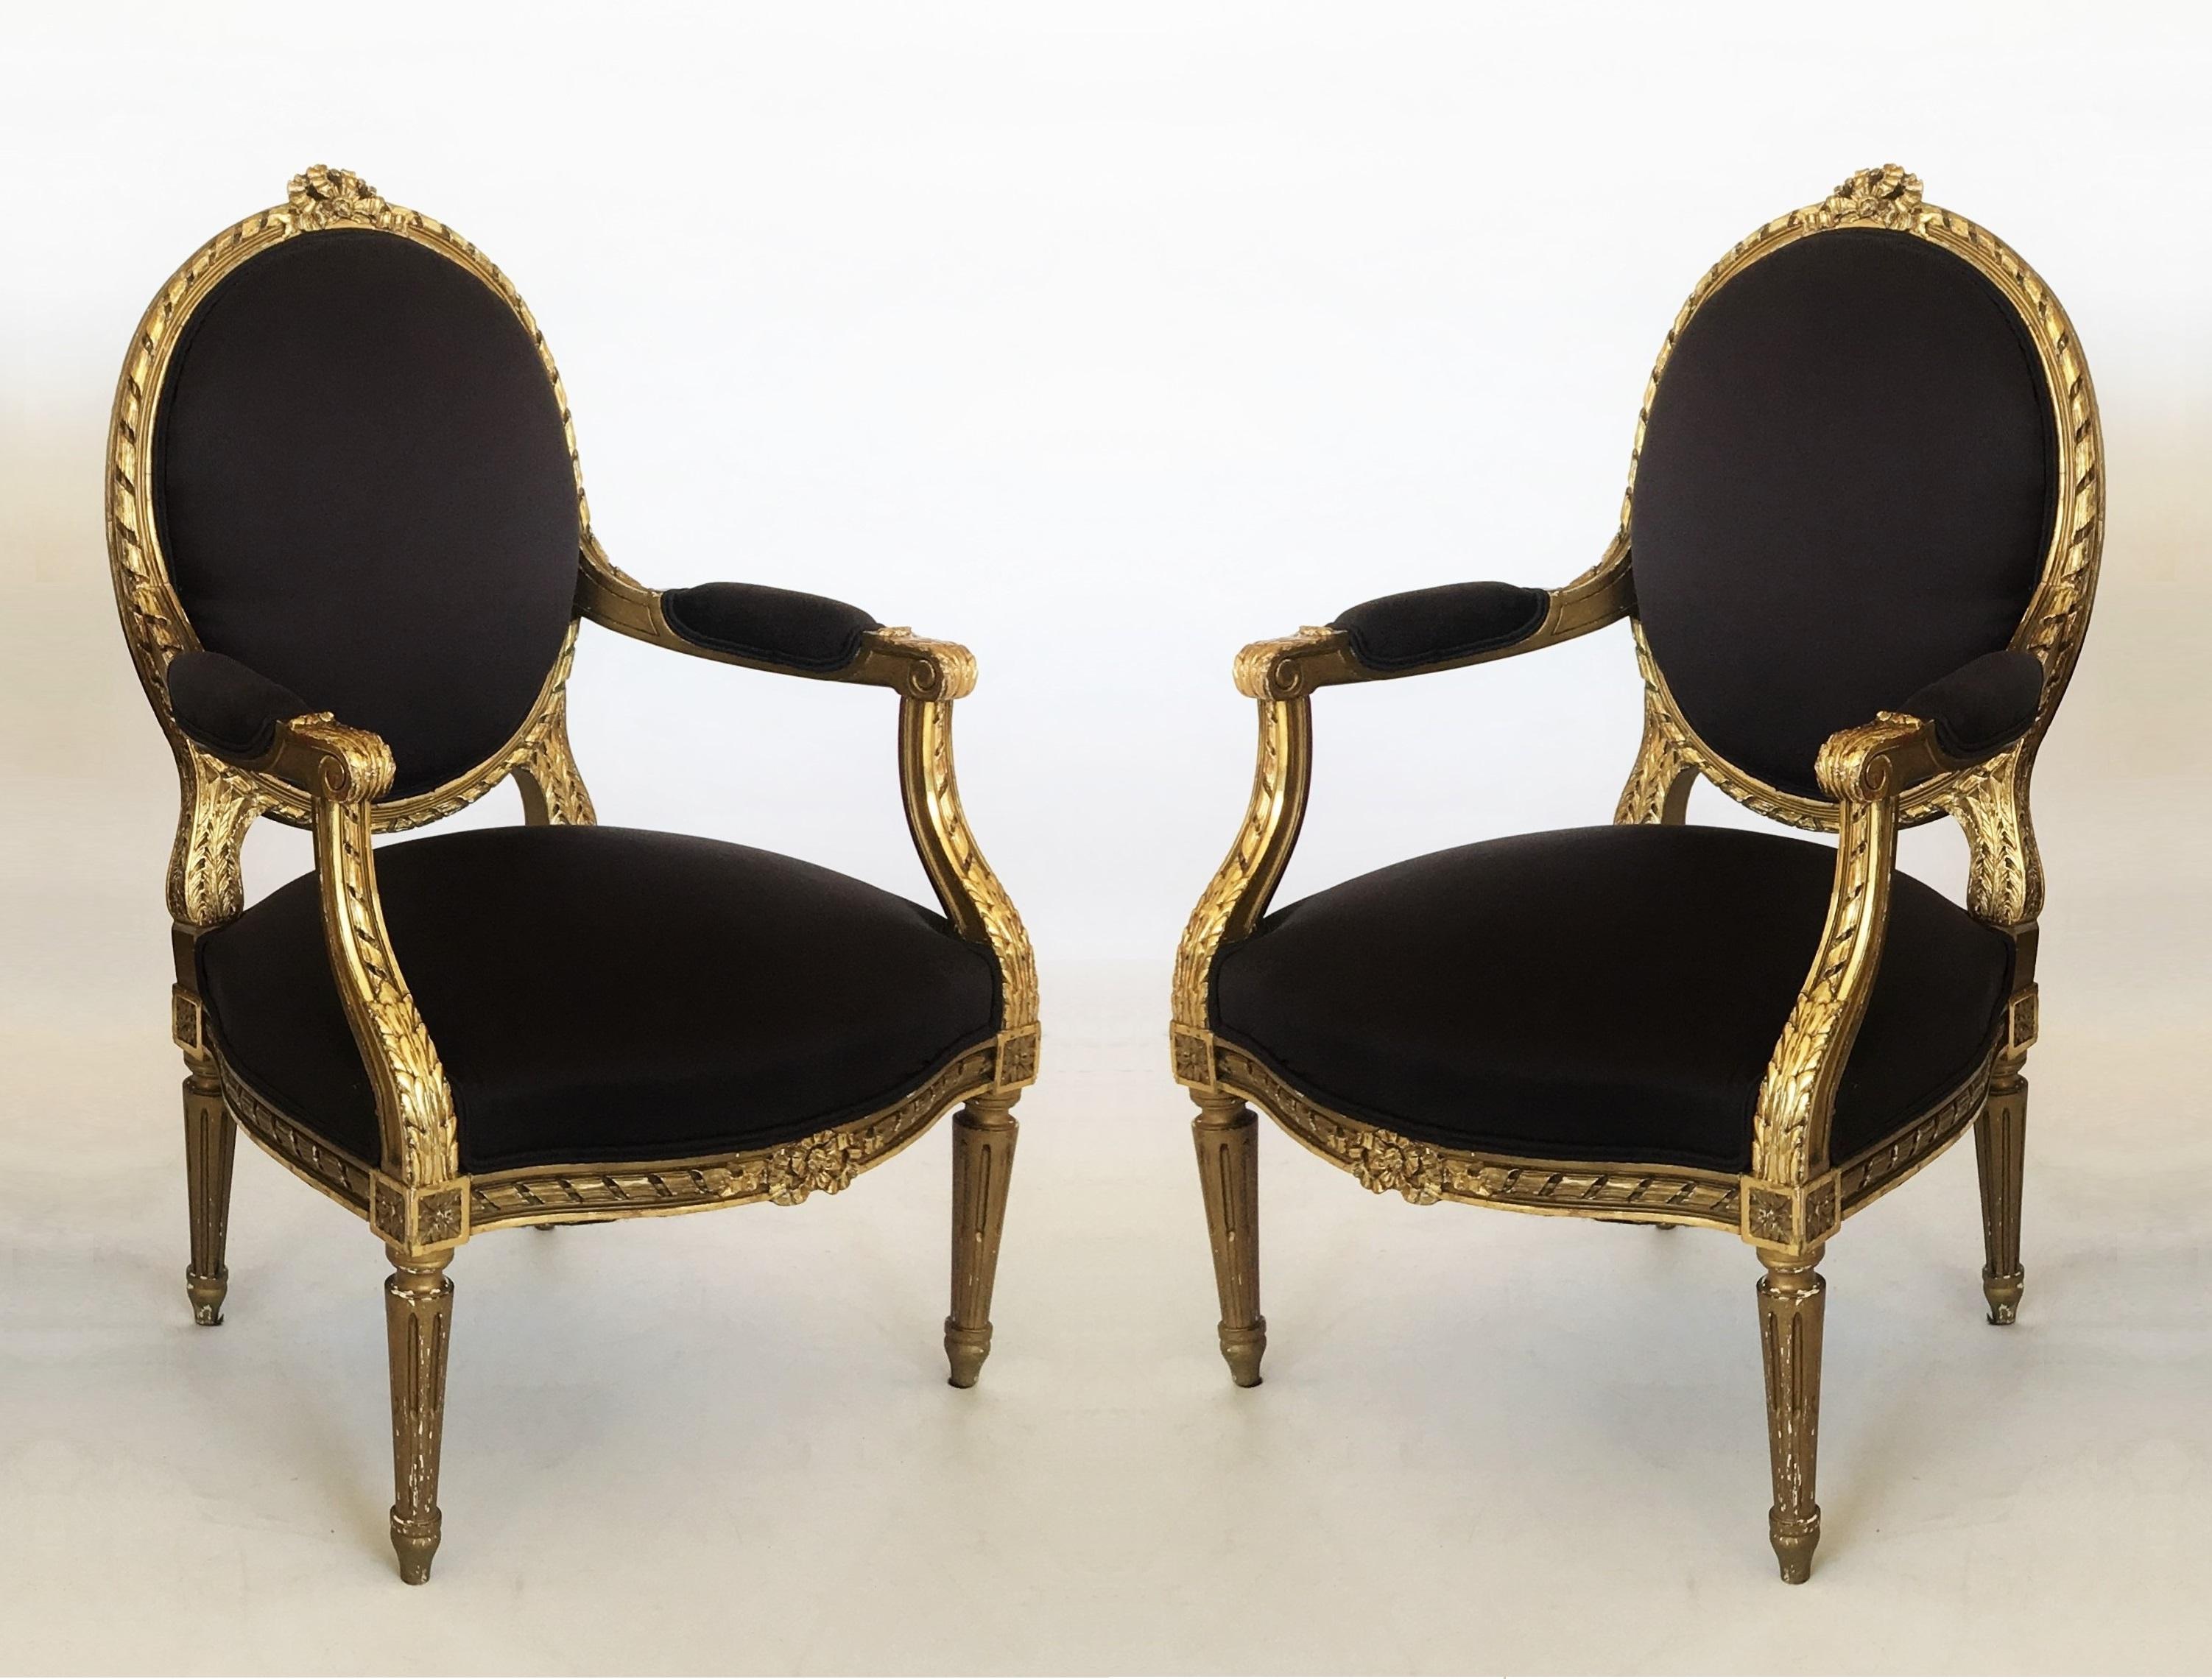 Upholstery 19th Century French Louis XVI Style Giltwood Fauteuils, Pair For Sale